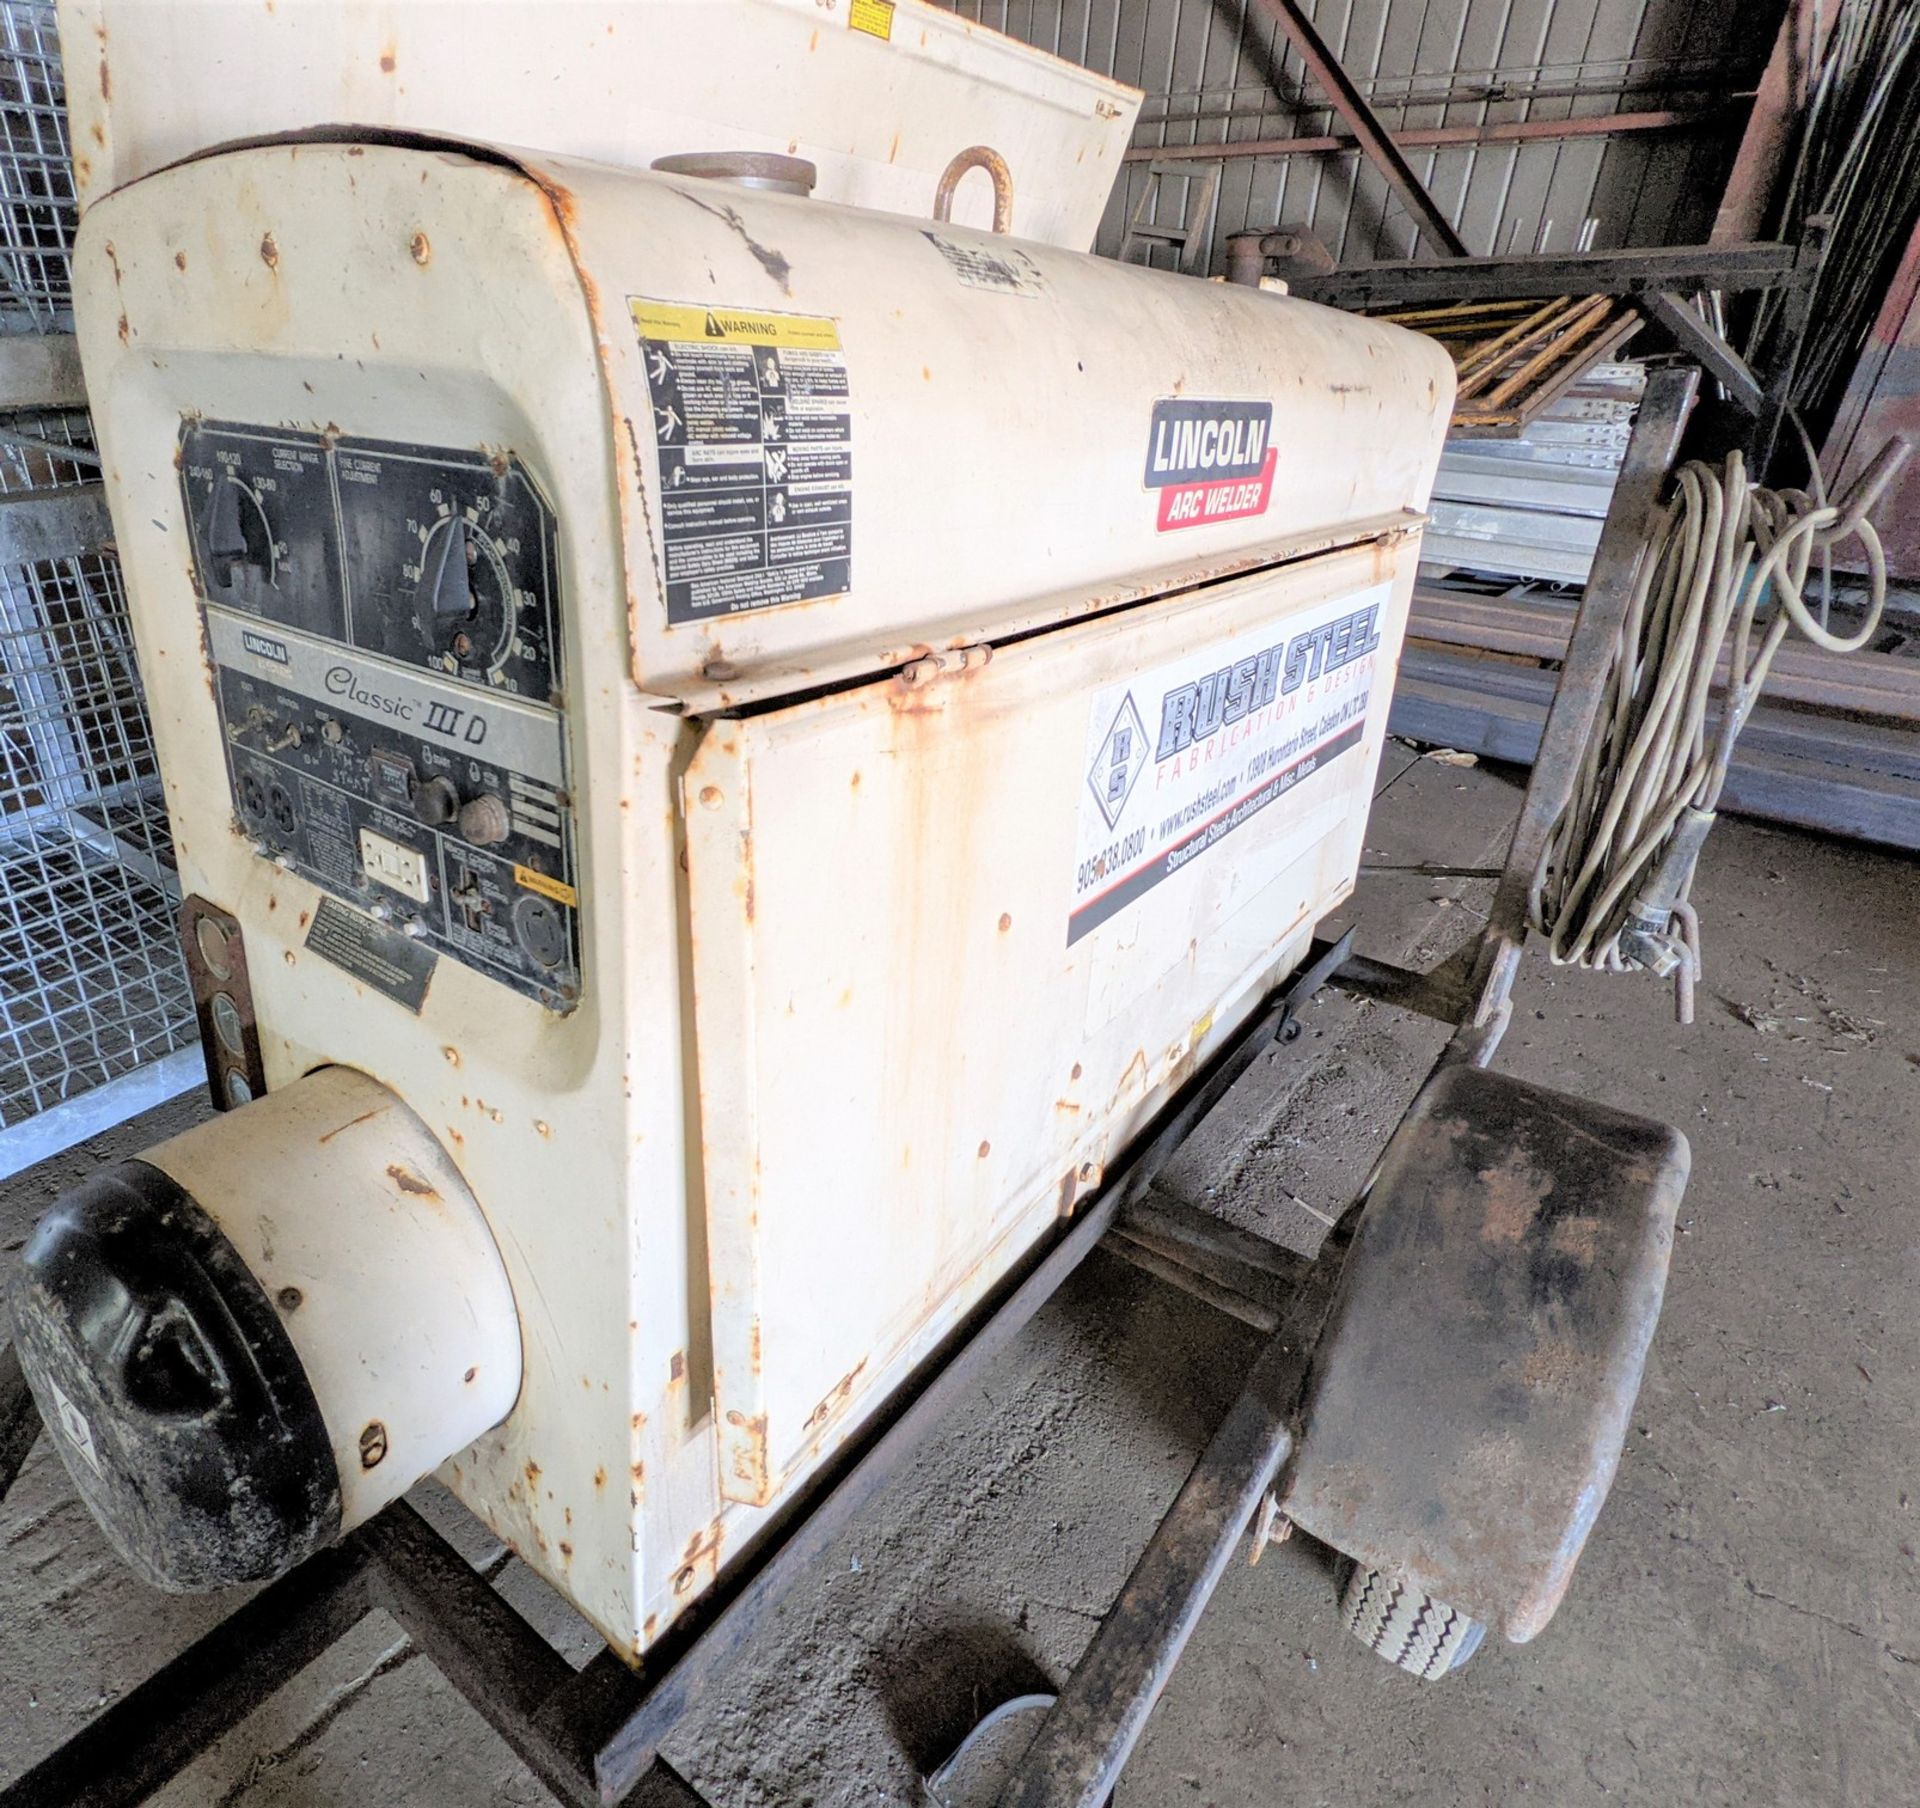 LINCOLN ELECTRIC CLASSIC III D SA300-TMD27 GAS POWERED WELDER ON TRAILER W/ CABLES - Image 6 of 8